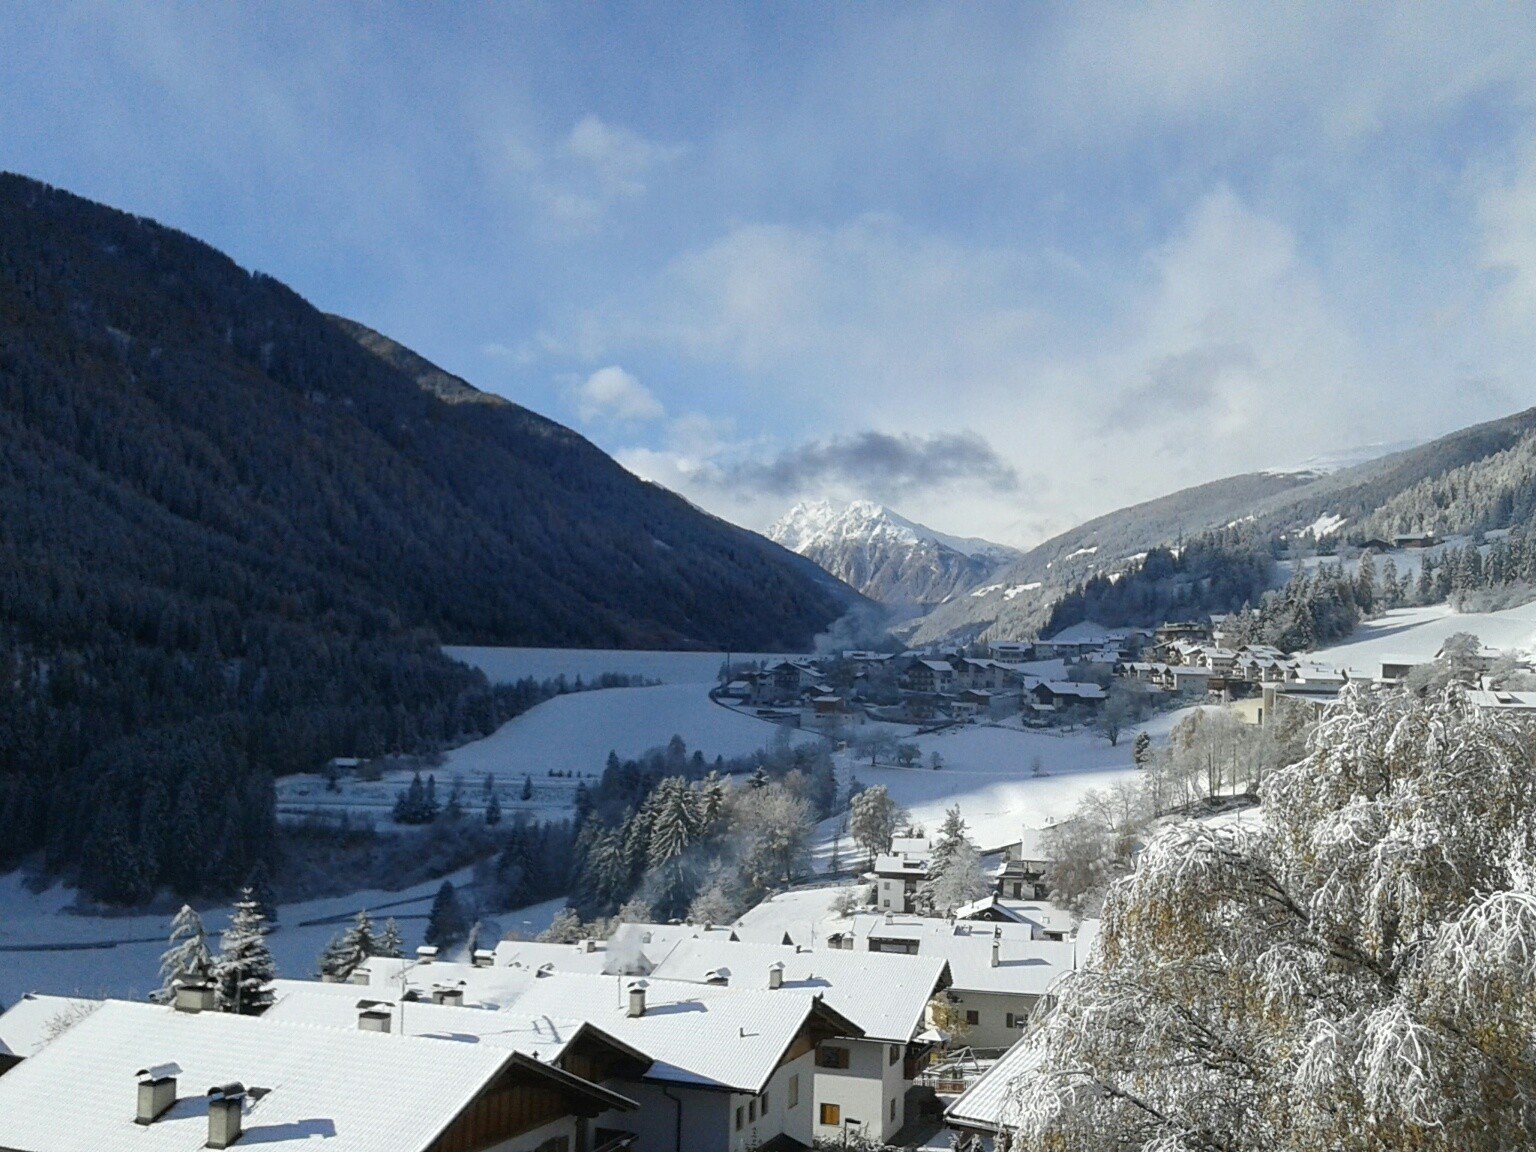 View from Hotel Schweigl with panorama on the village of St. Walburg, the mountains, the Schwemmalm ski area and all until the the end of the Ultental valley.